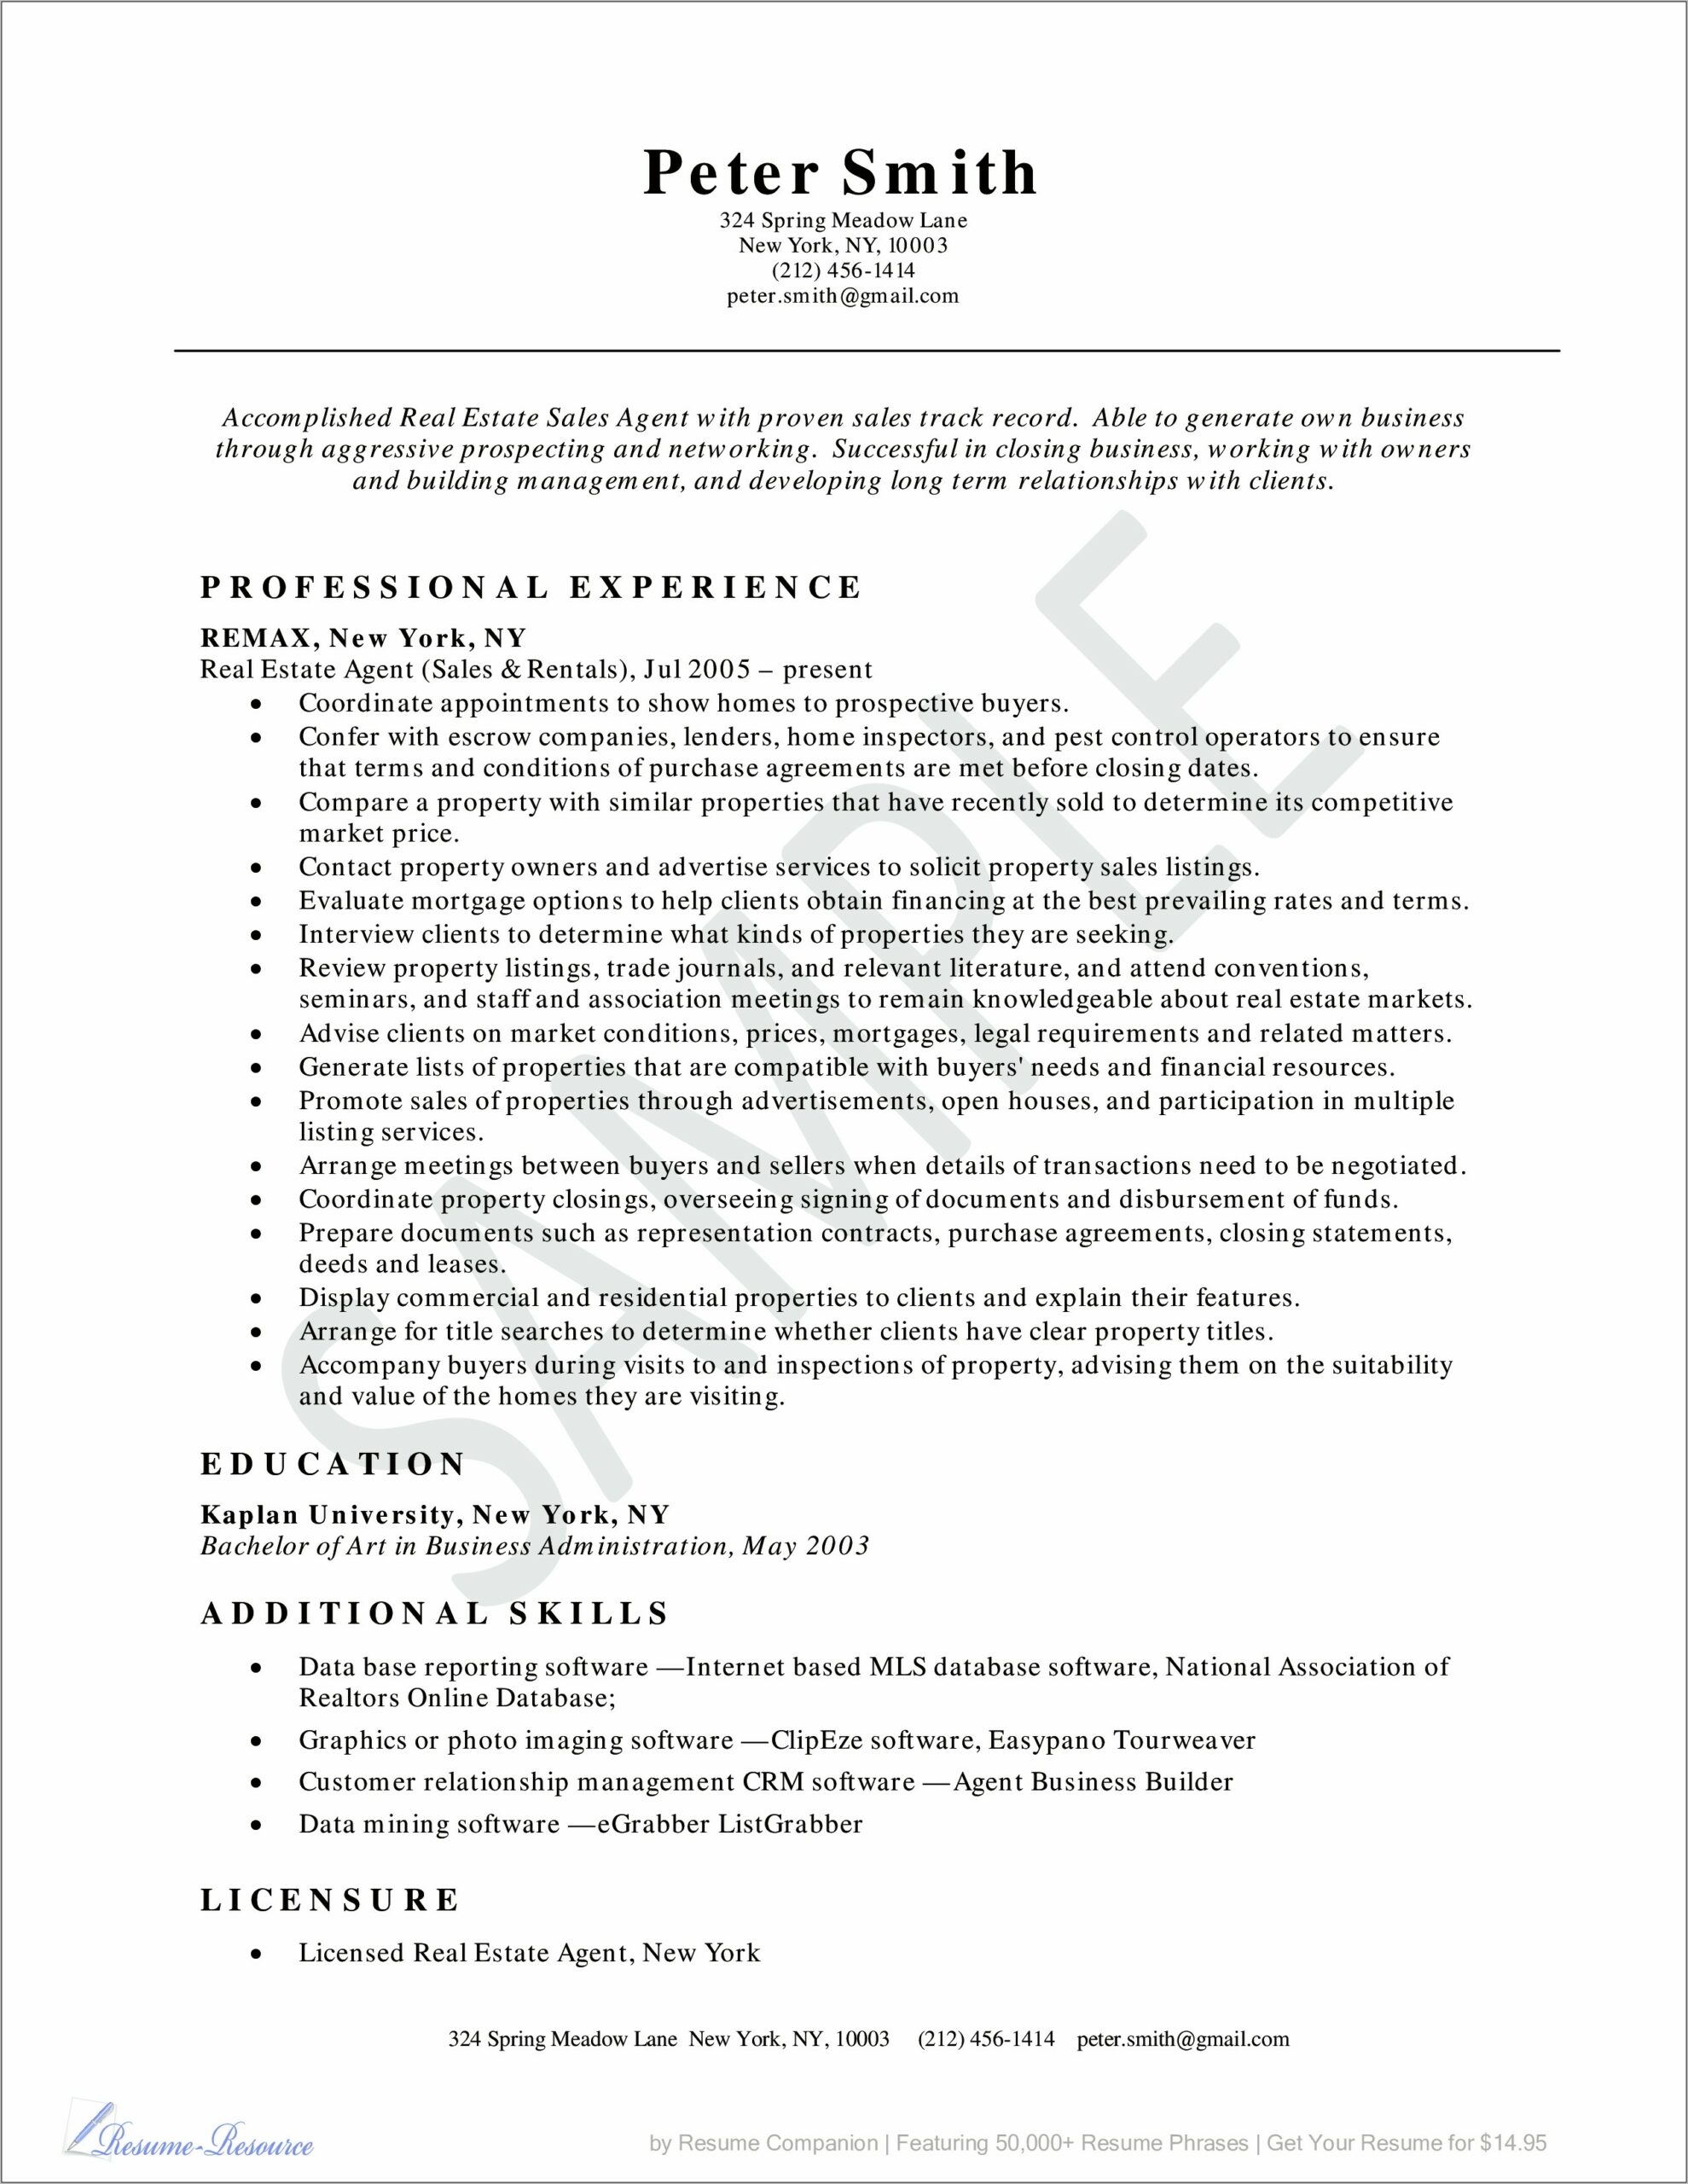 Free Real Estate Sale Person Resume For Beginers